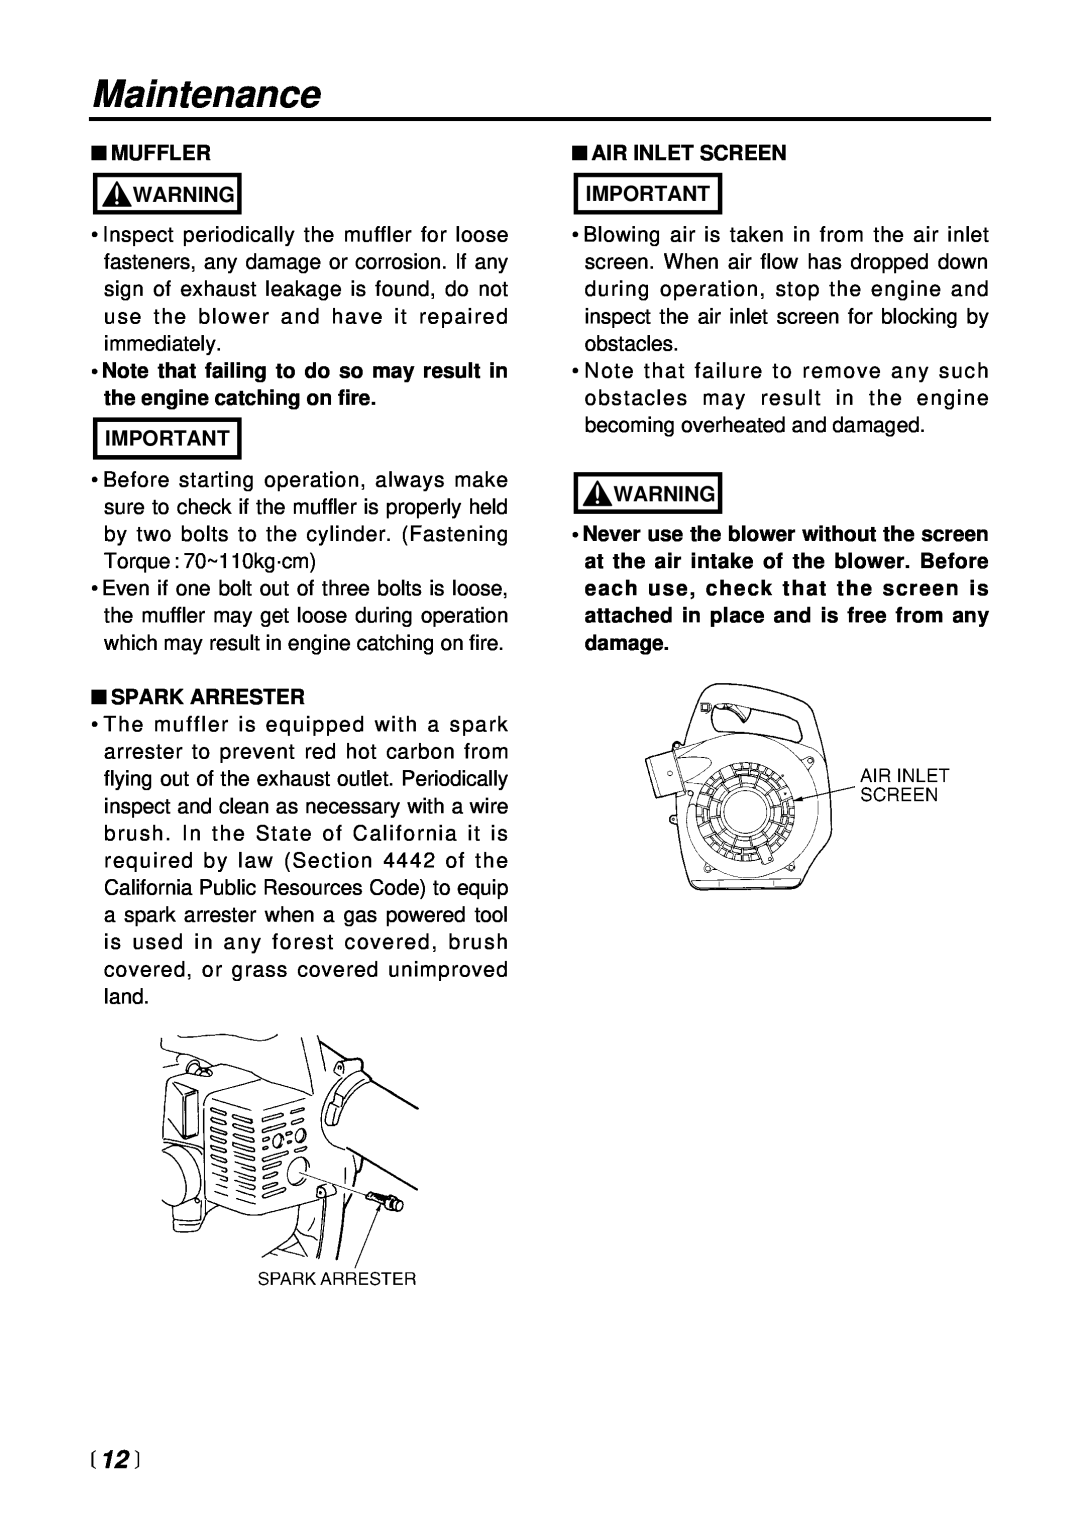 RedMax HBZ2500 manual  12 , Maintenance, Muffler, Note that failing to do so may result in the engine catching on fire 